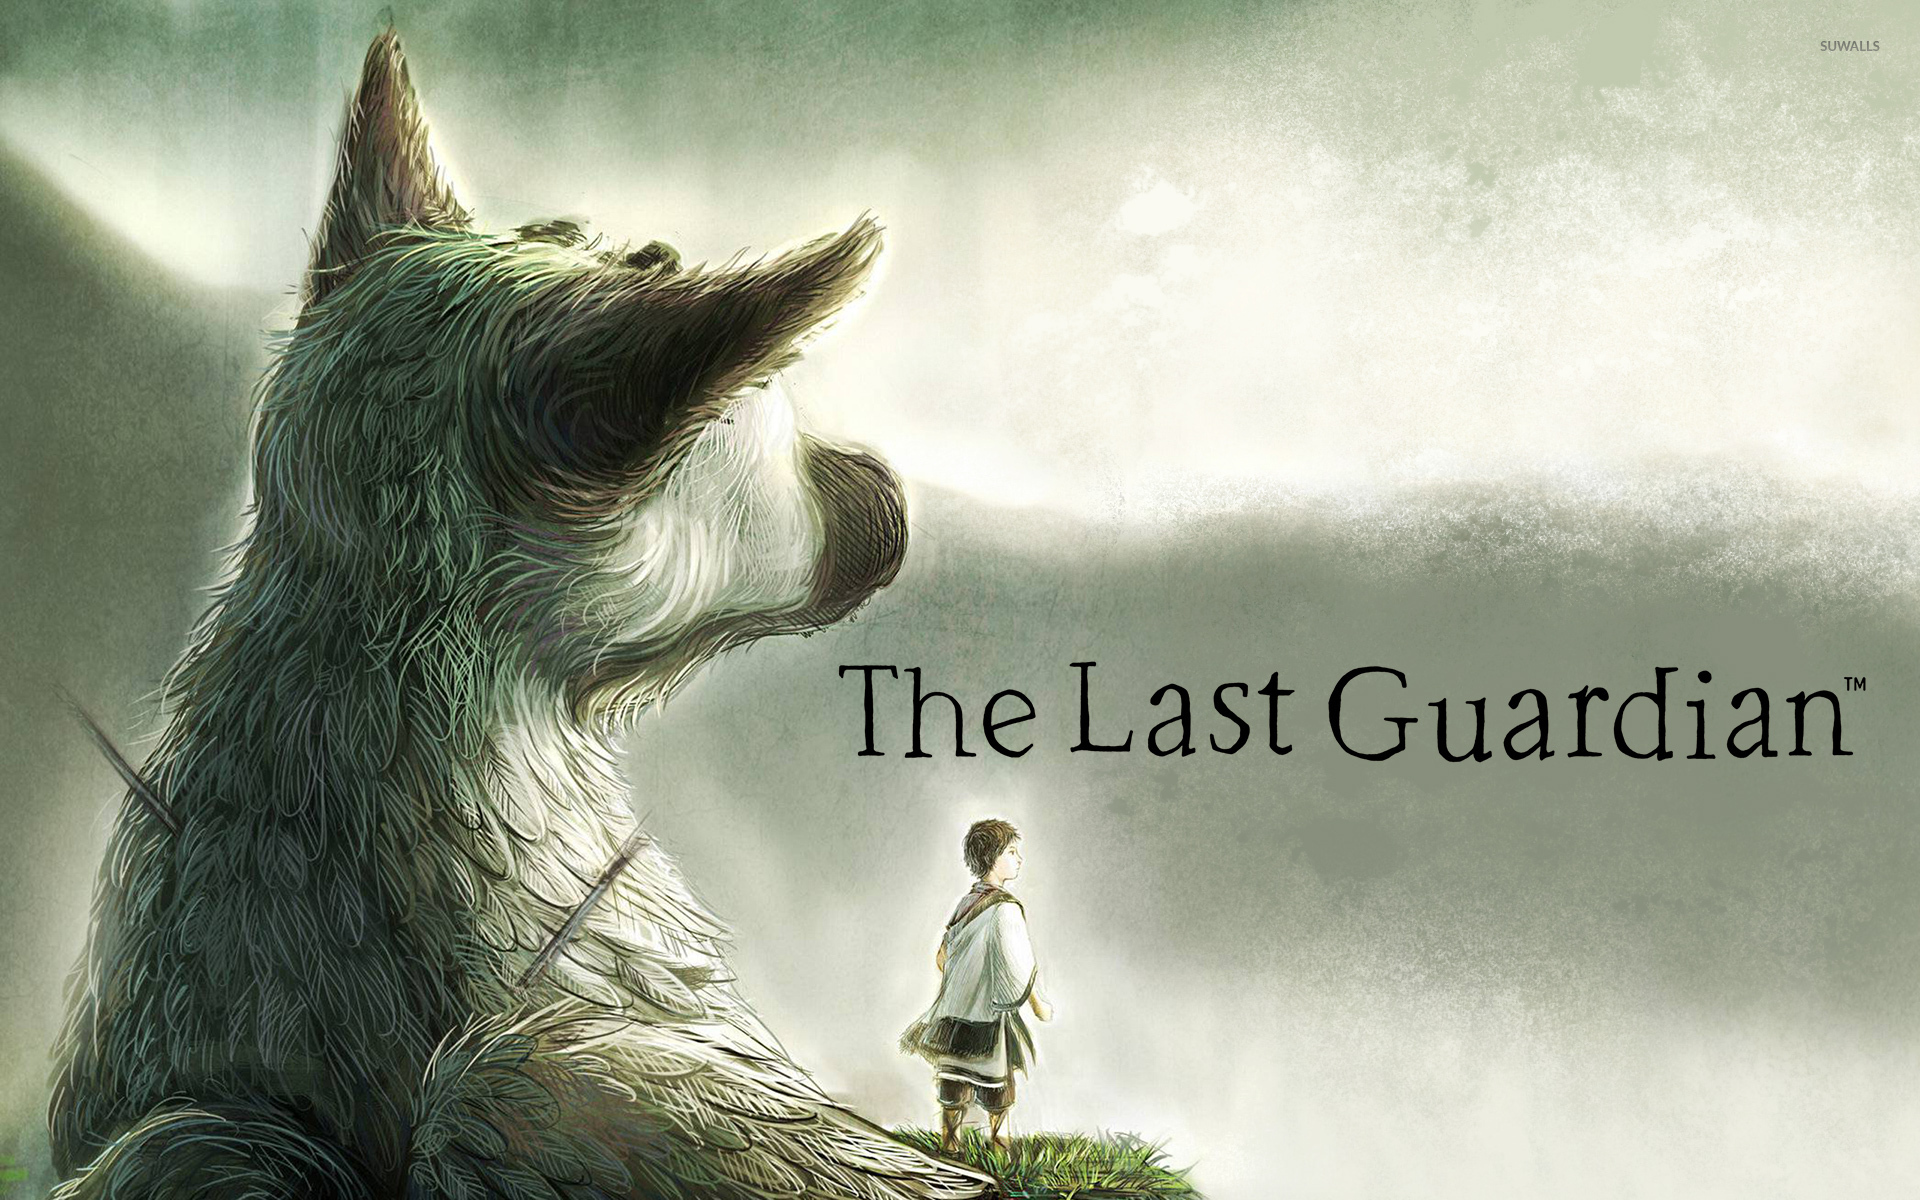 trico-and-the-boy-in-the-last-guardian-53730-1920x1200